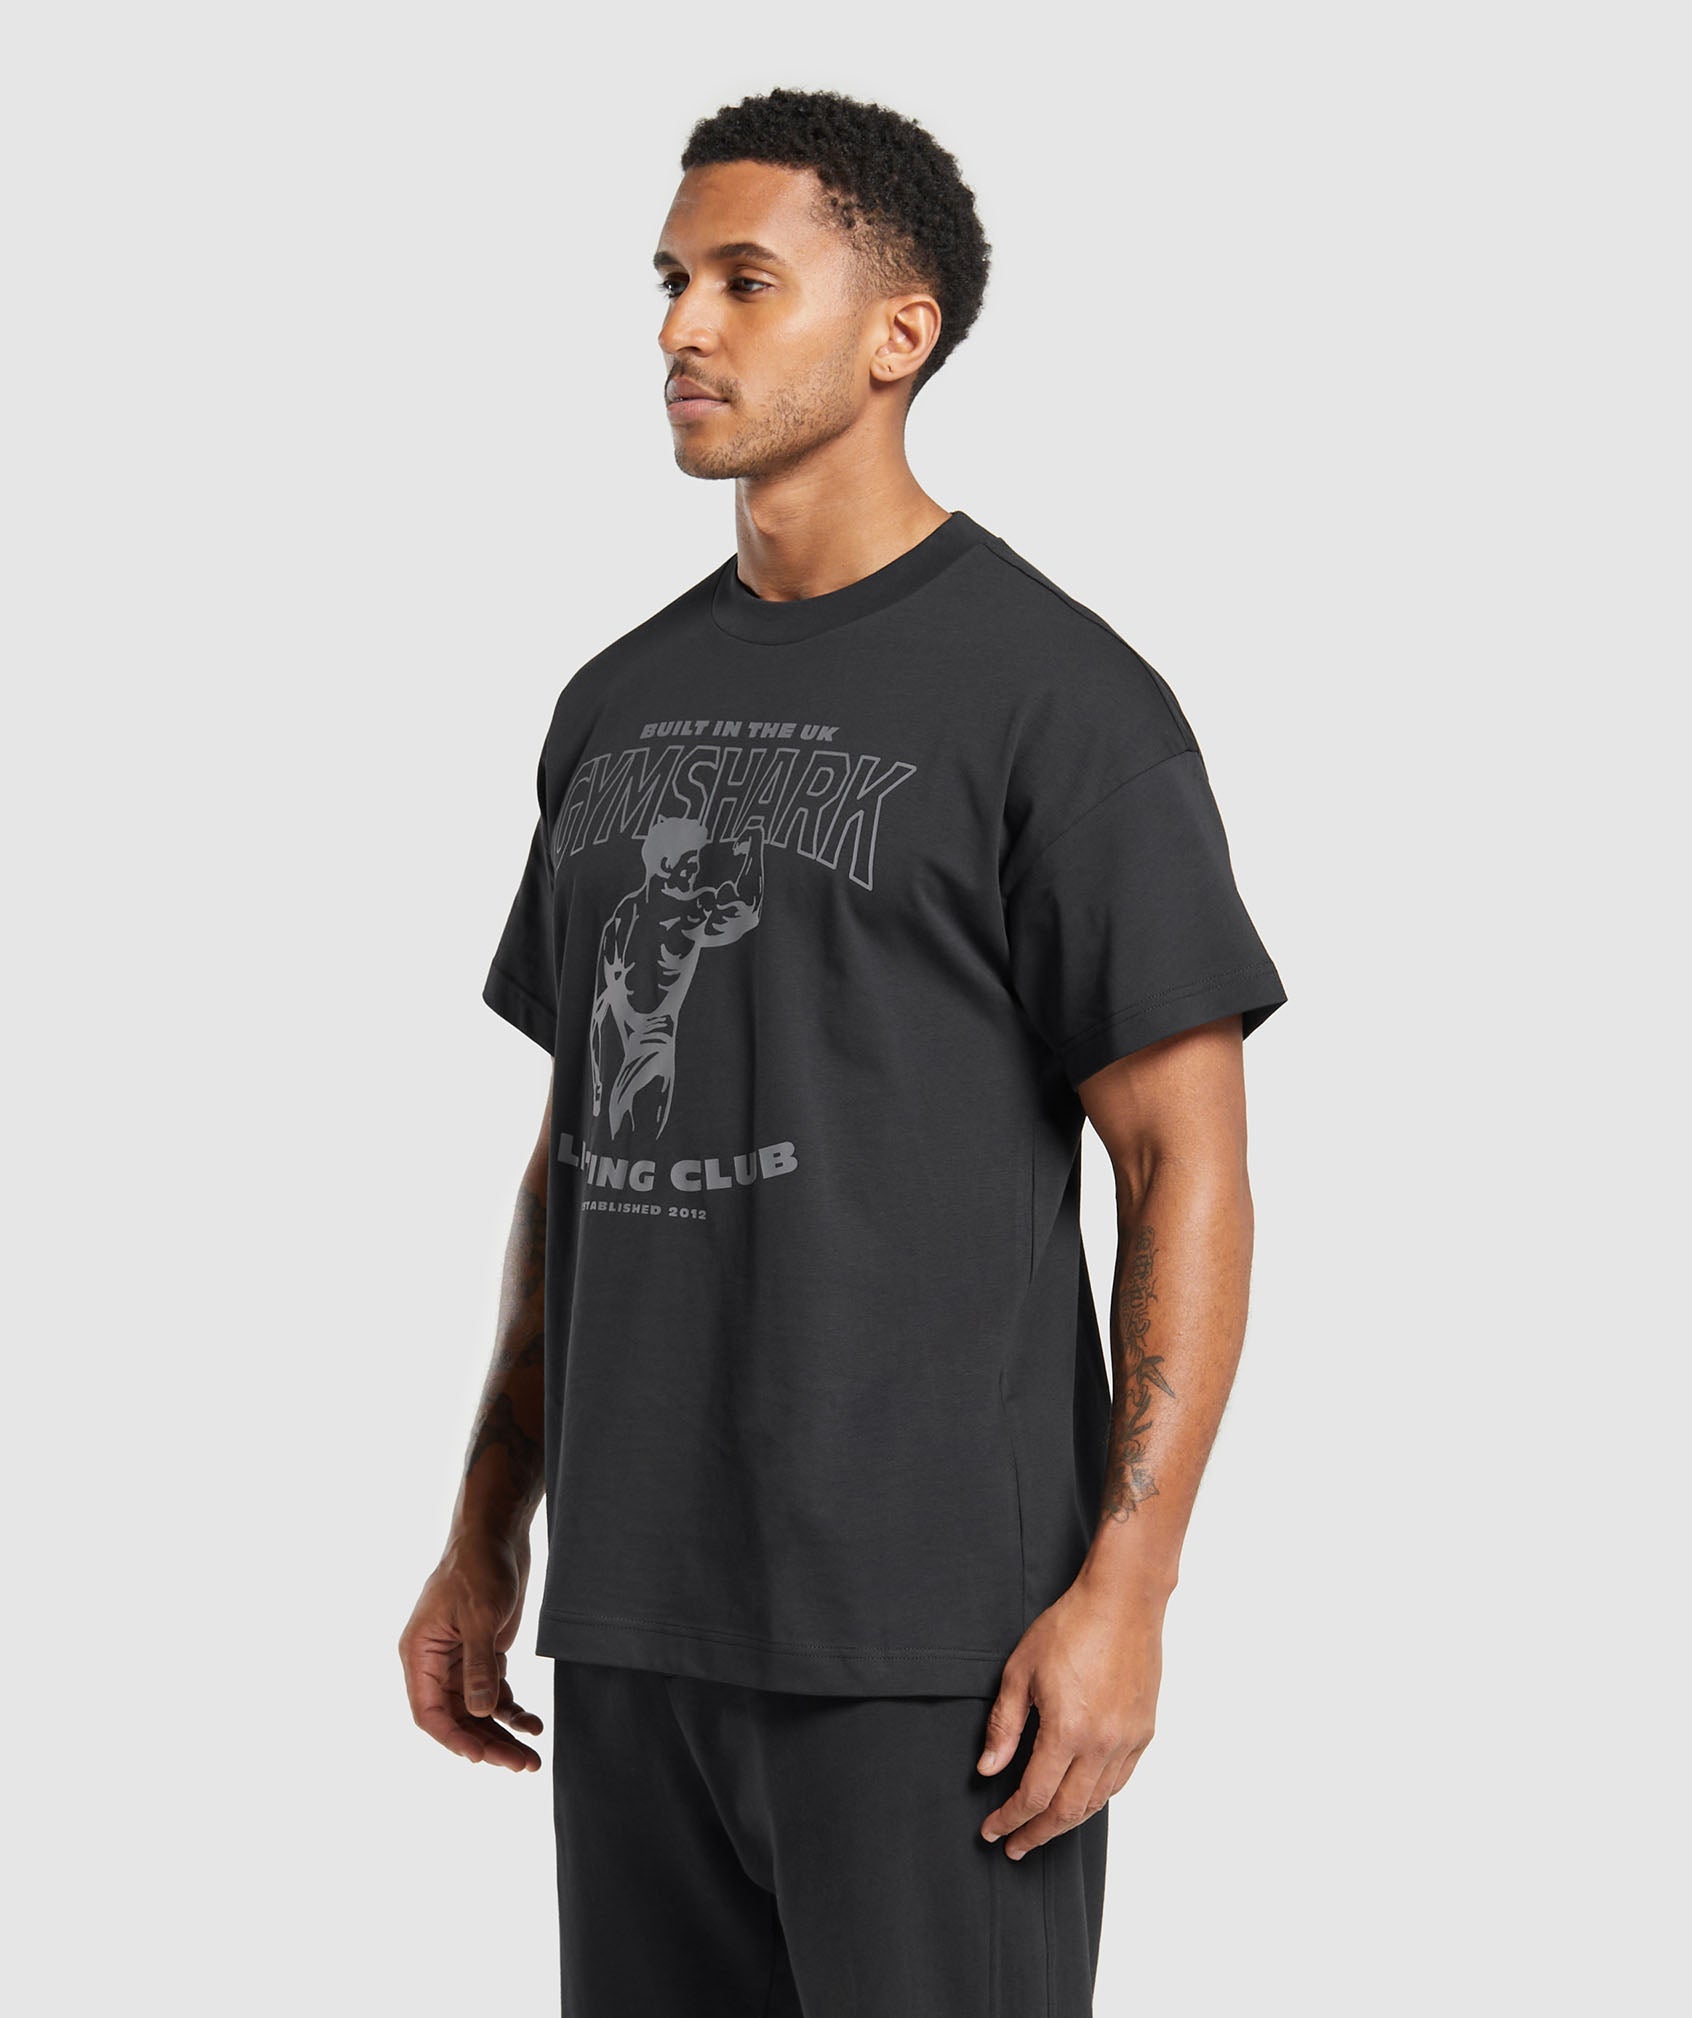 Built in the UK T-Shirt in Black - view 3